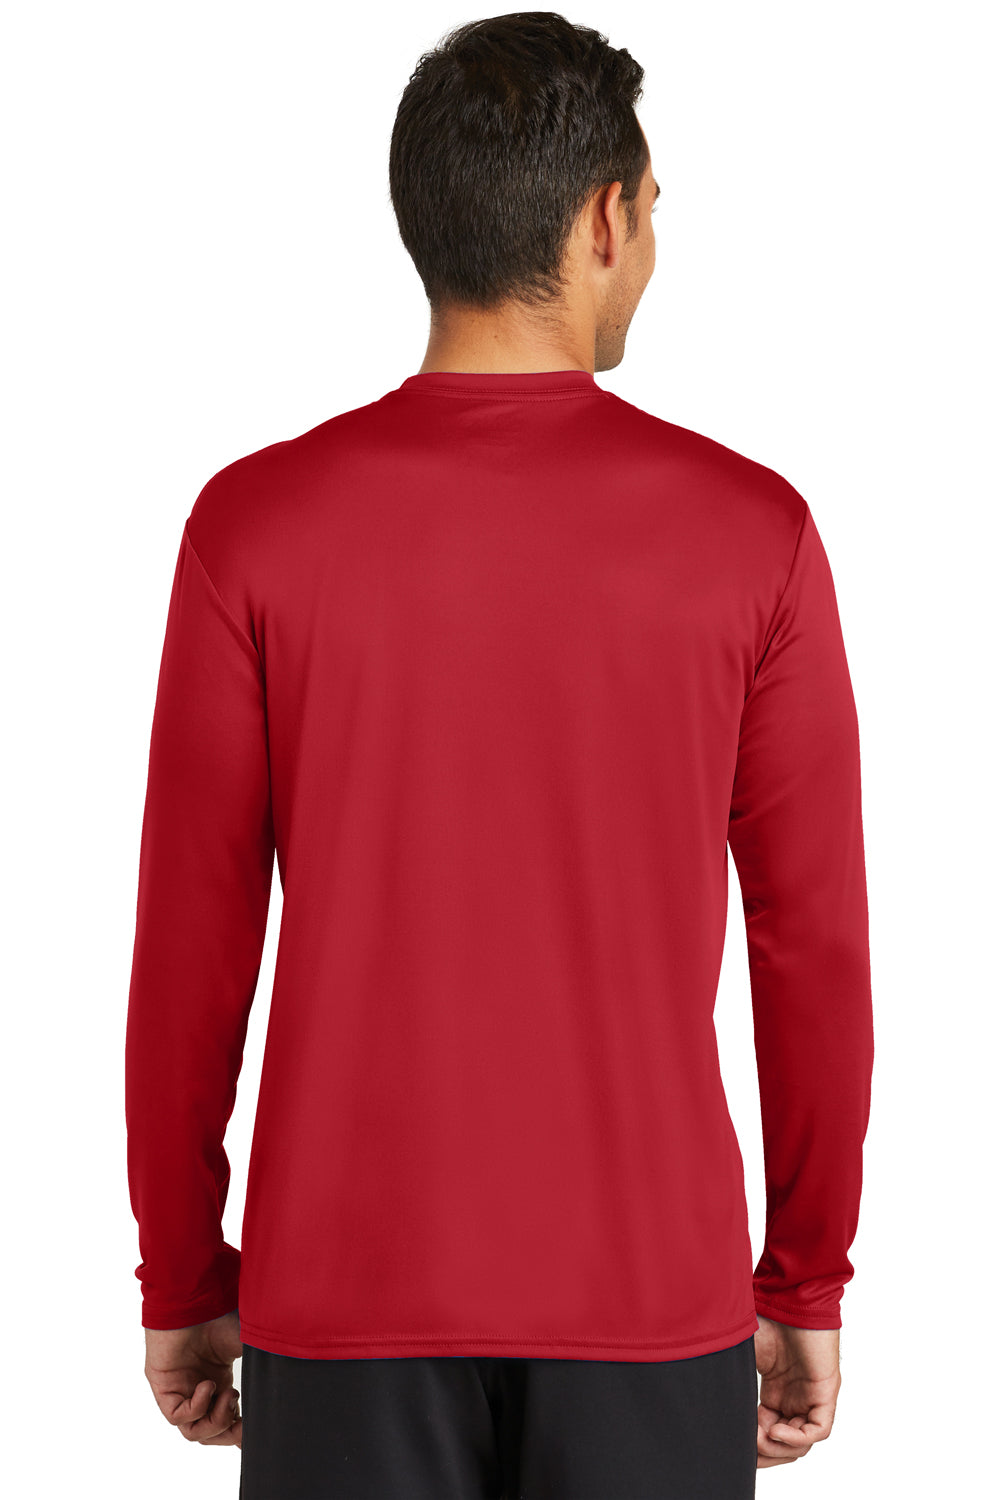 Port & Company PC380LS Mens Dry Zone Performance Moisture Wicking Long Sleeve Crewneck T-Shirt Red Back